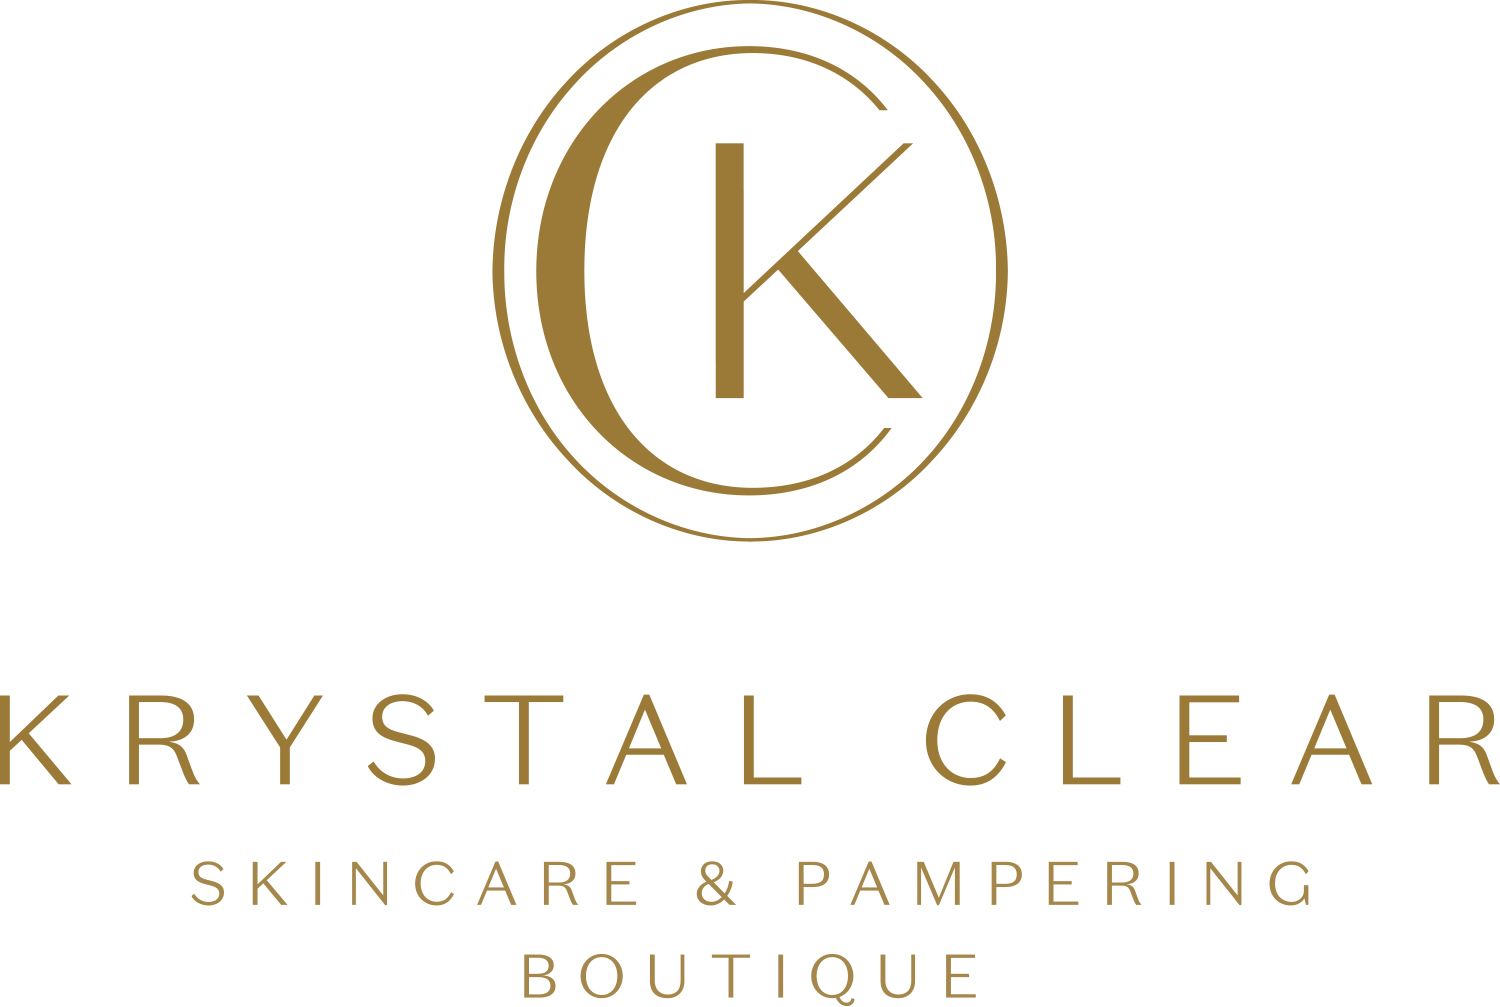 Krystal Clear Skincare and Pampering Boutique